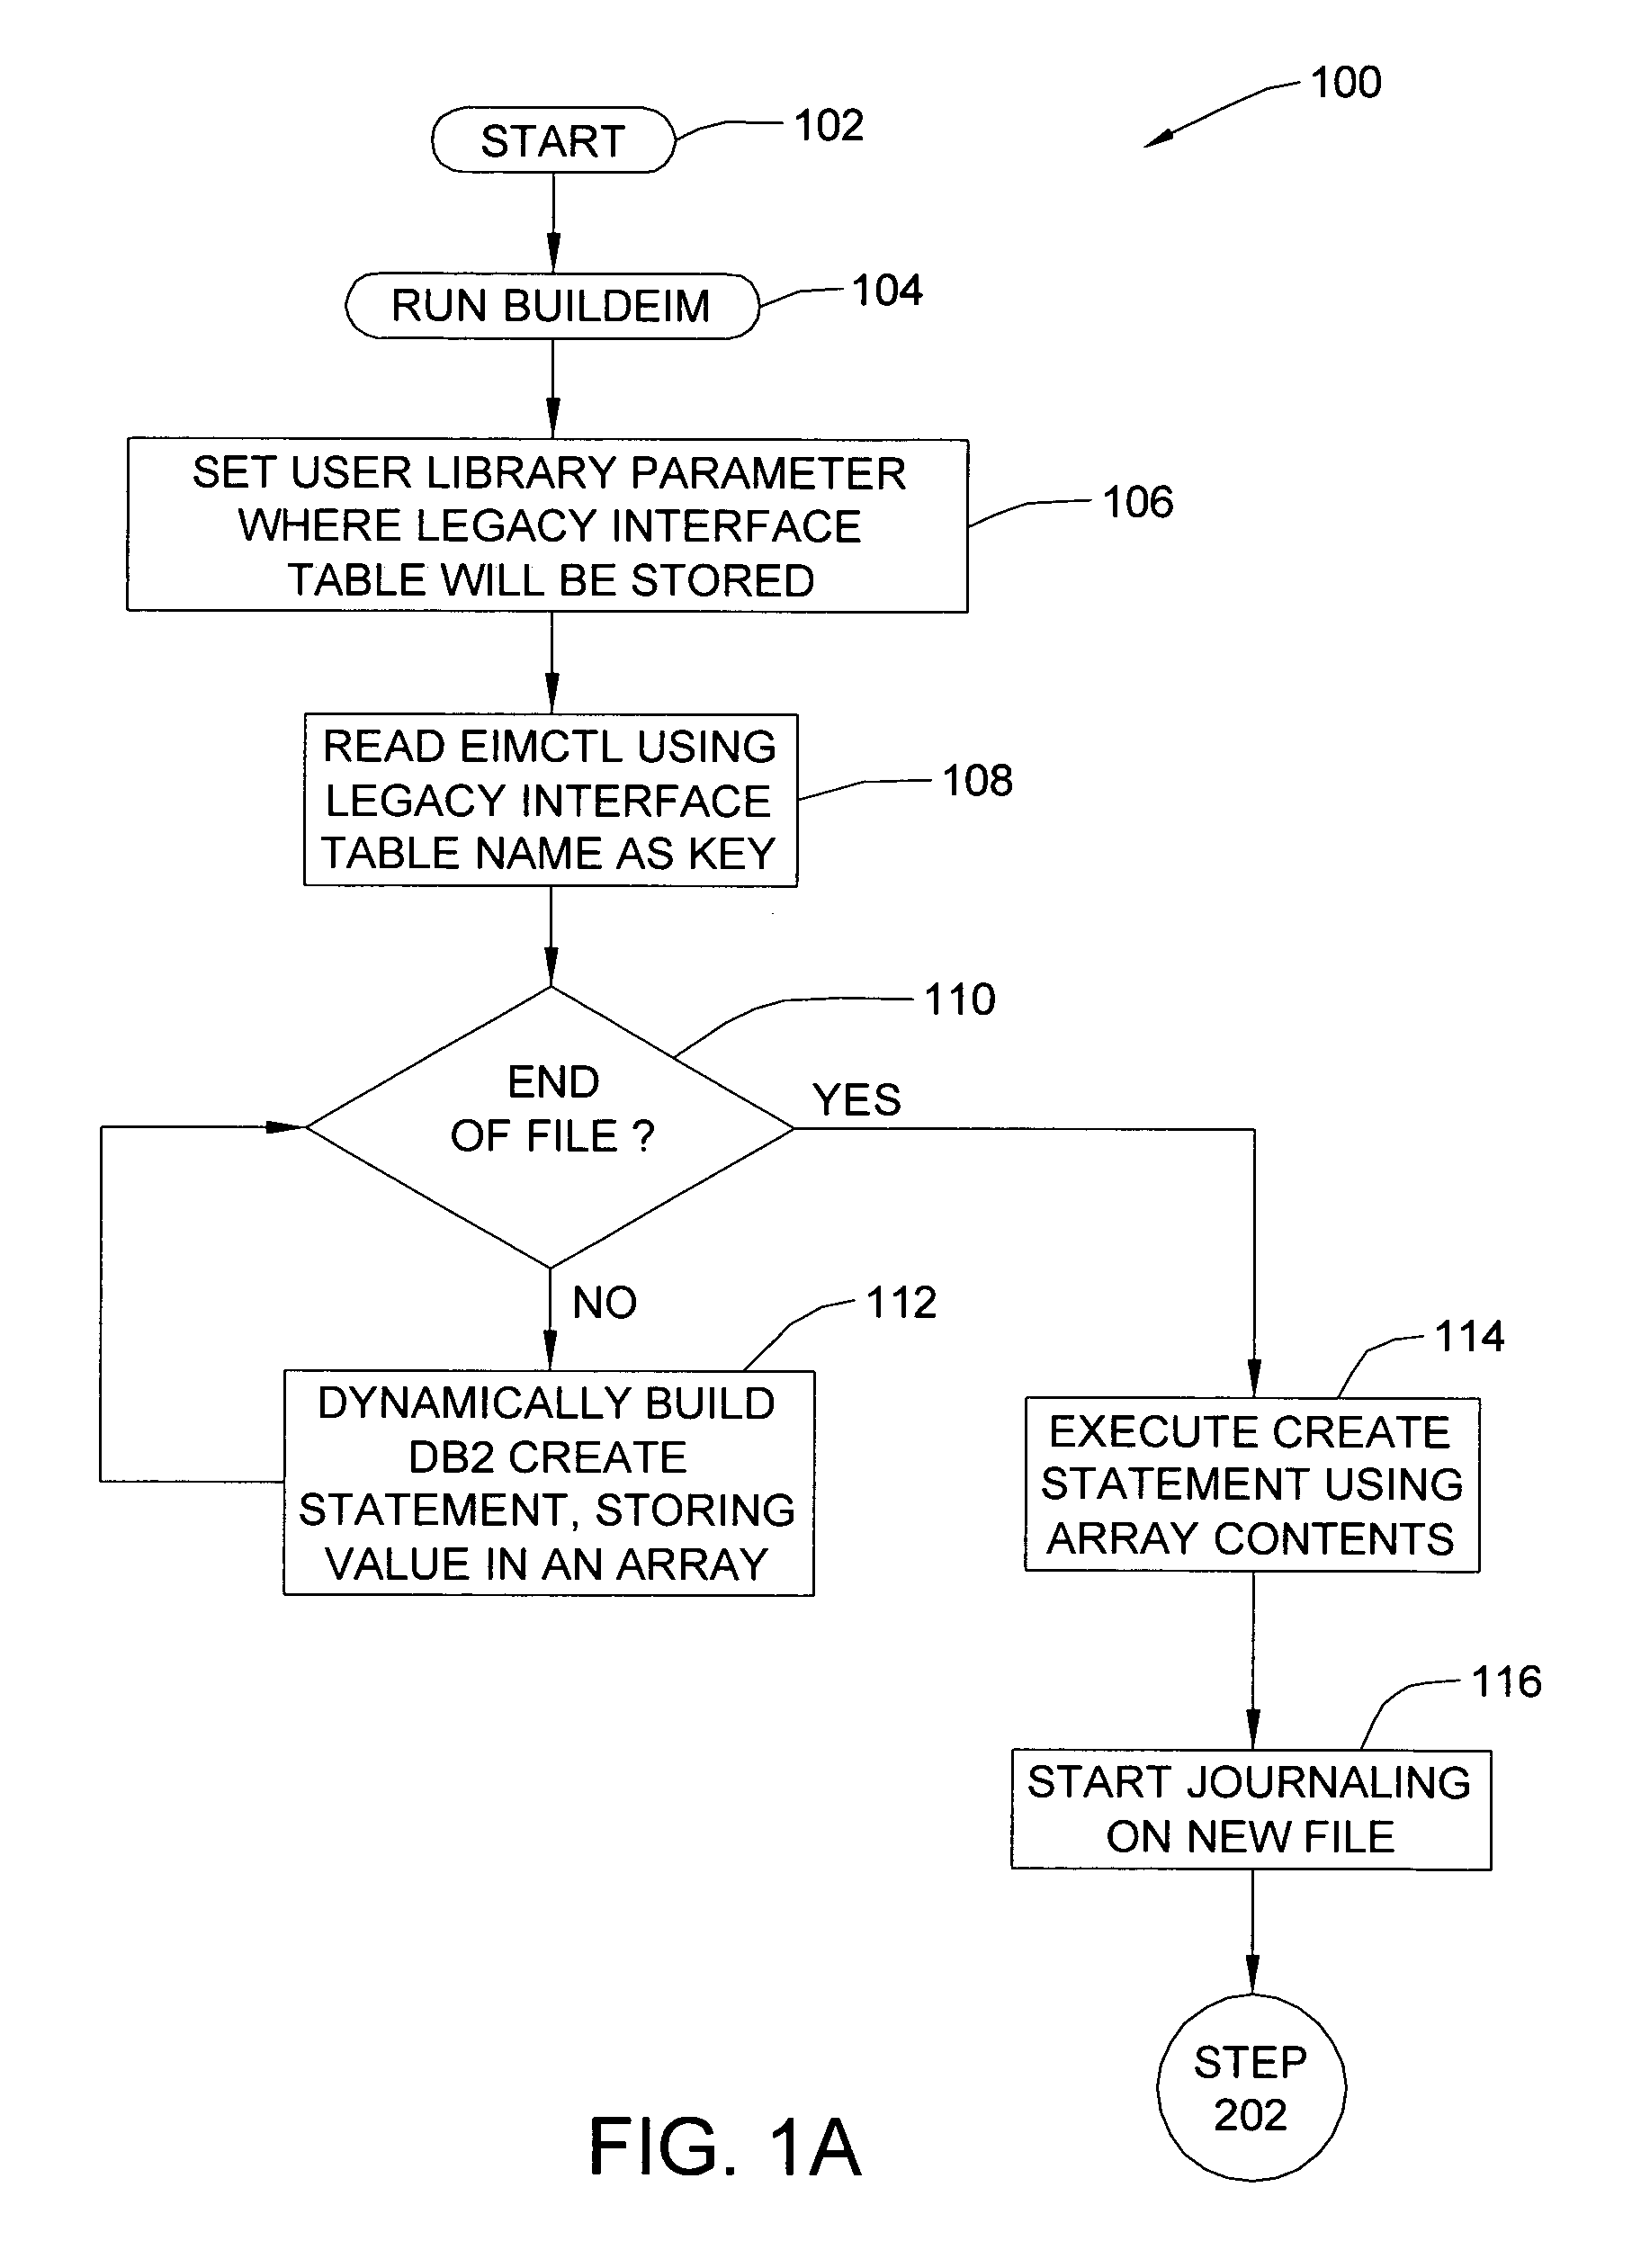 Method and program product for migrating data from a legacy system